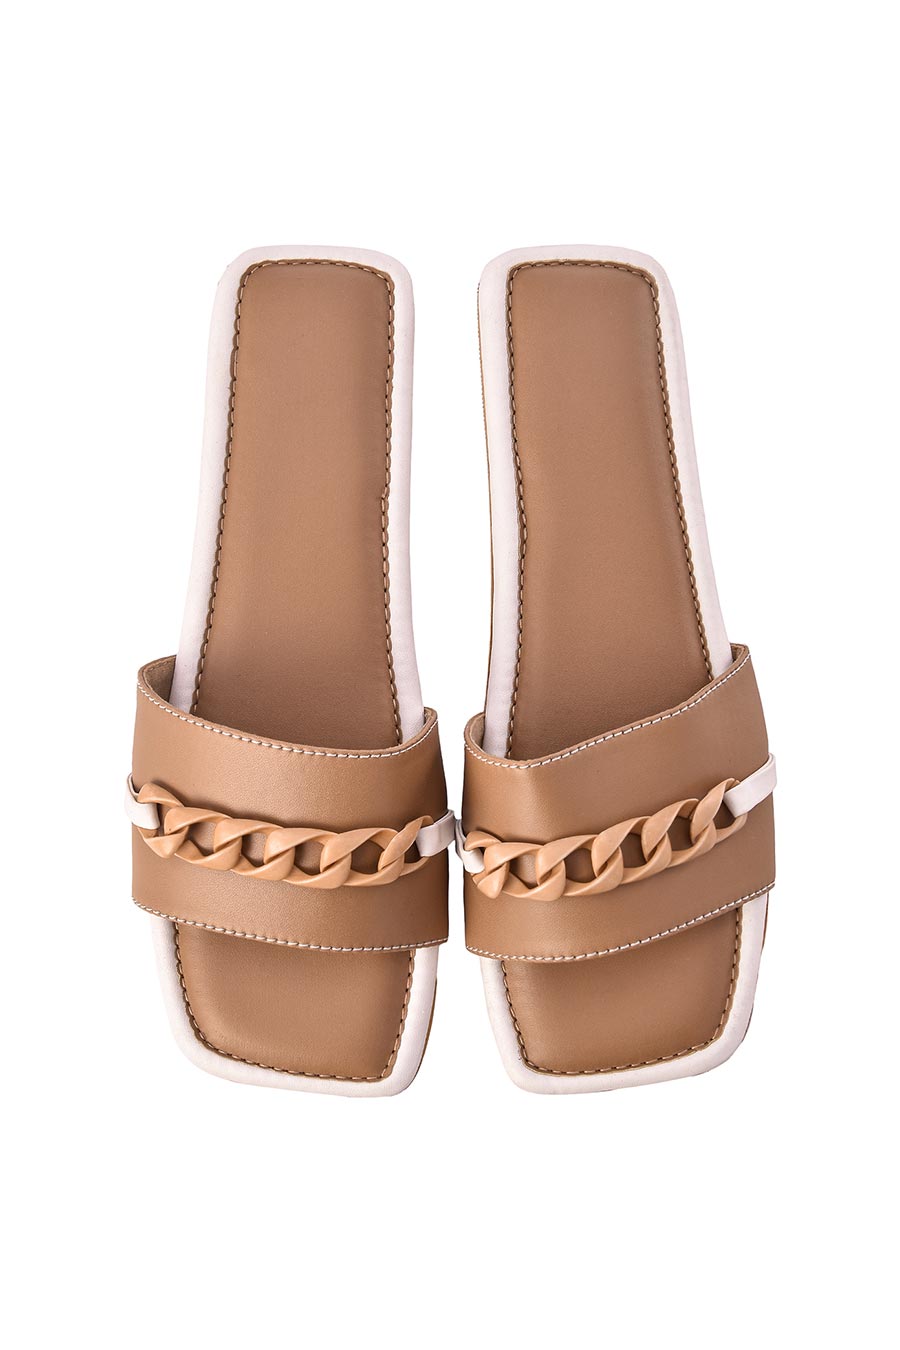 The Daily Edit Nude Chain Flats